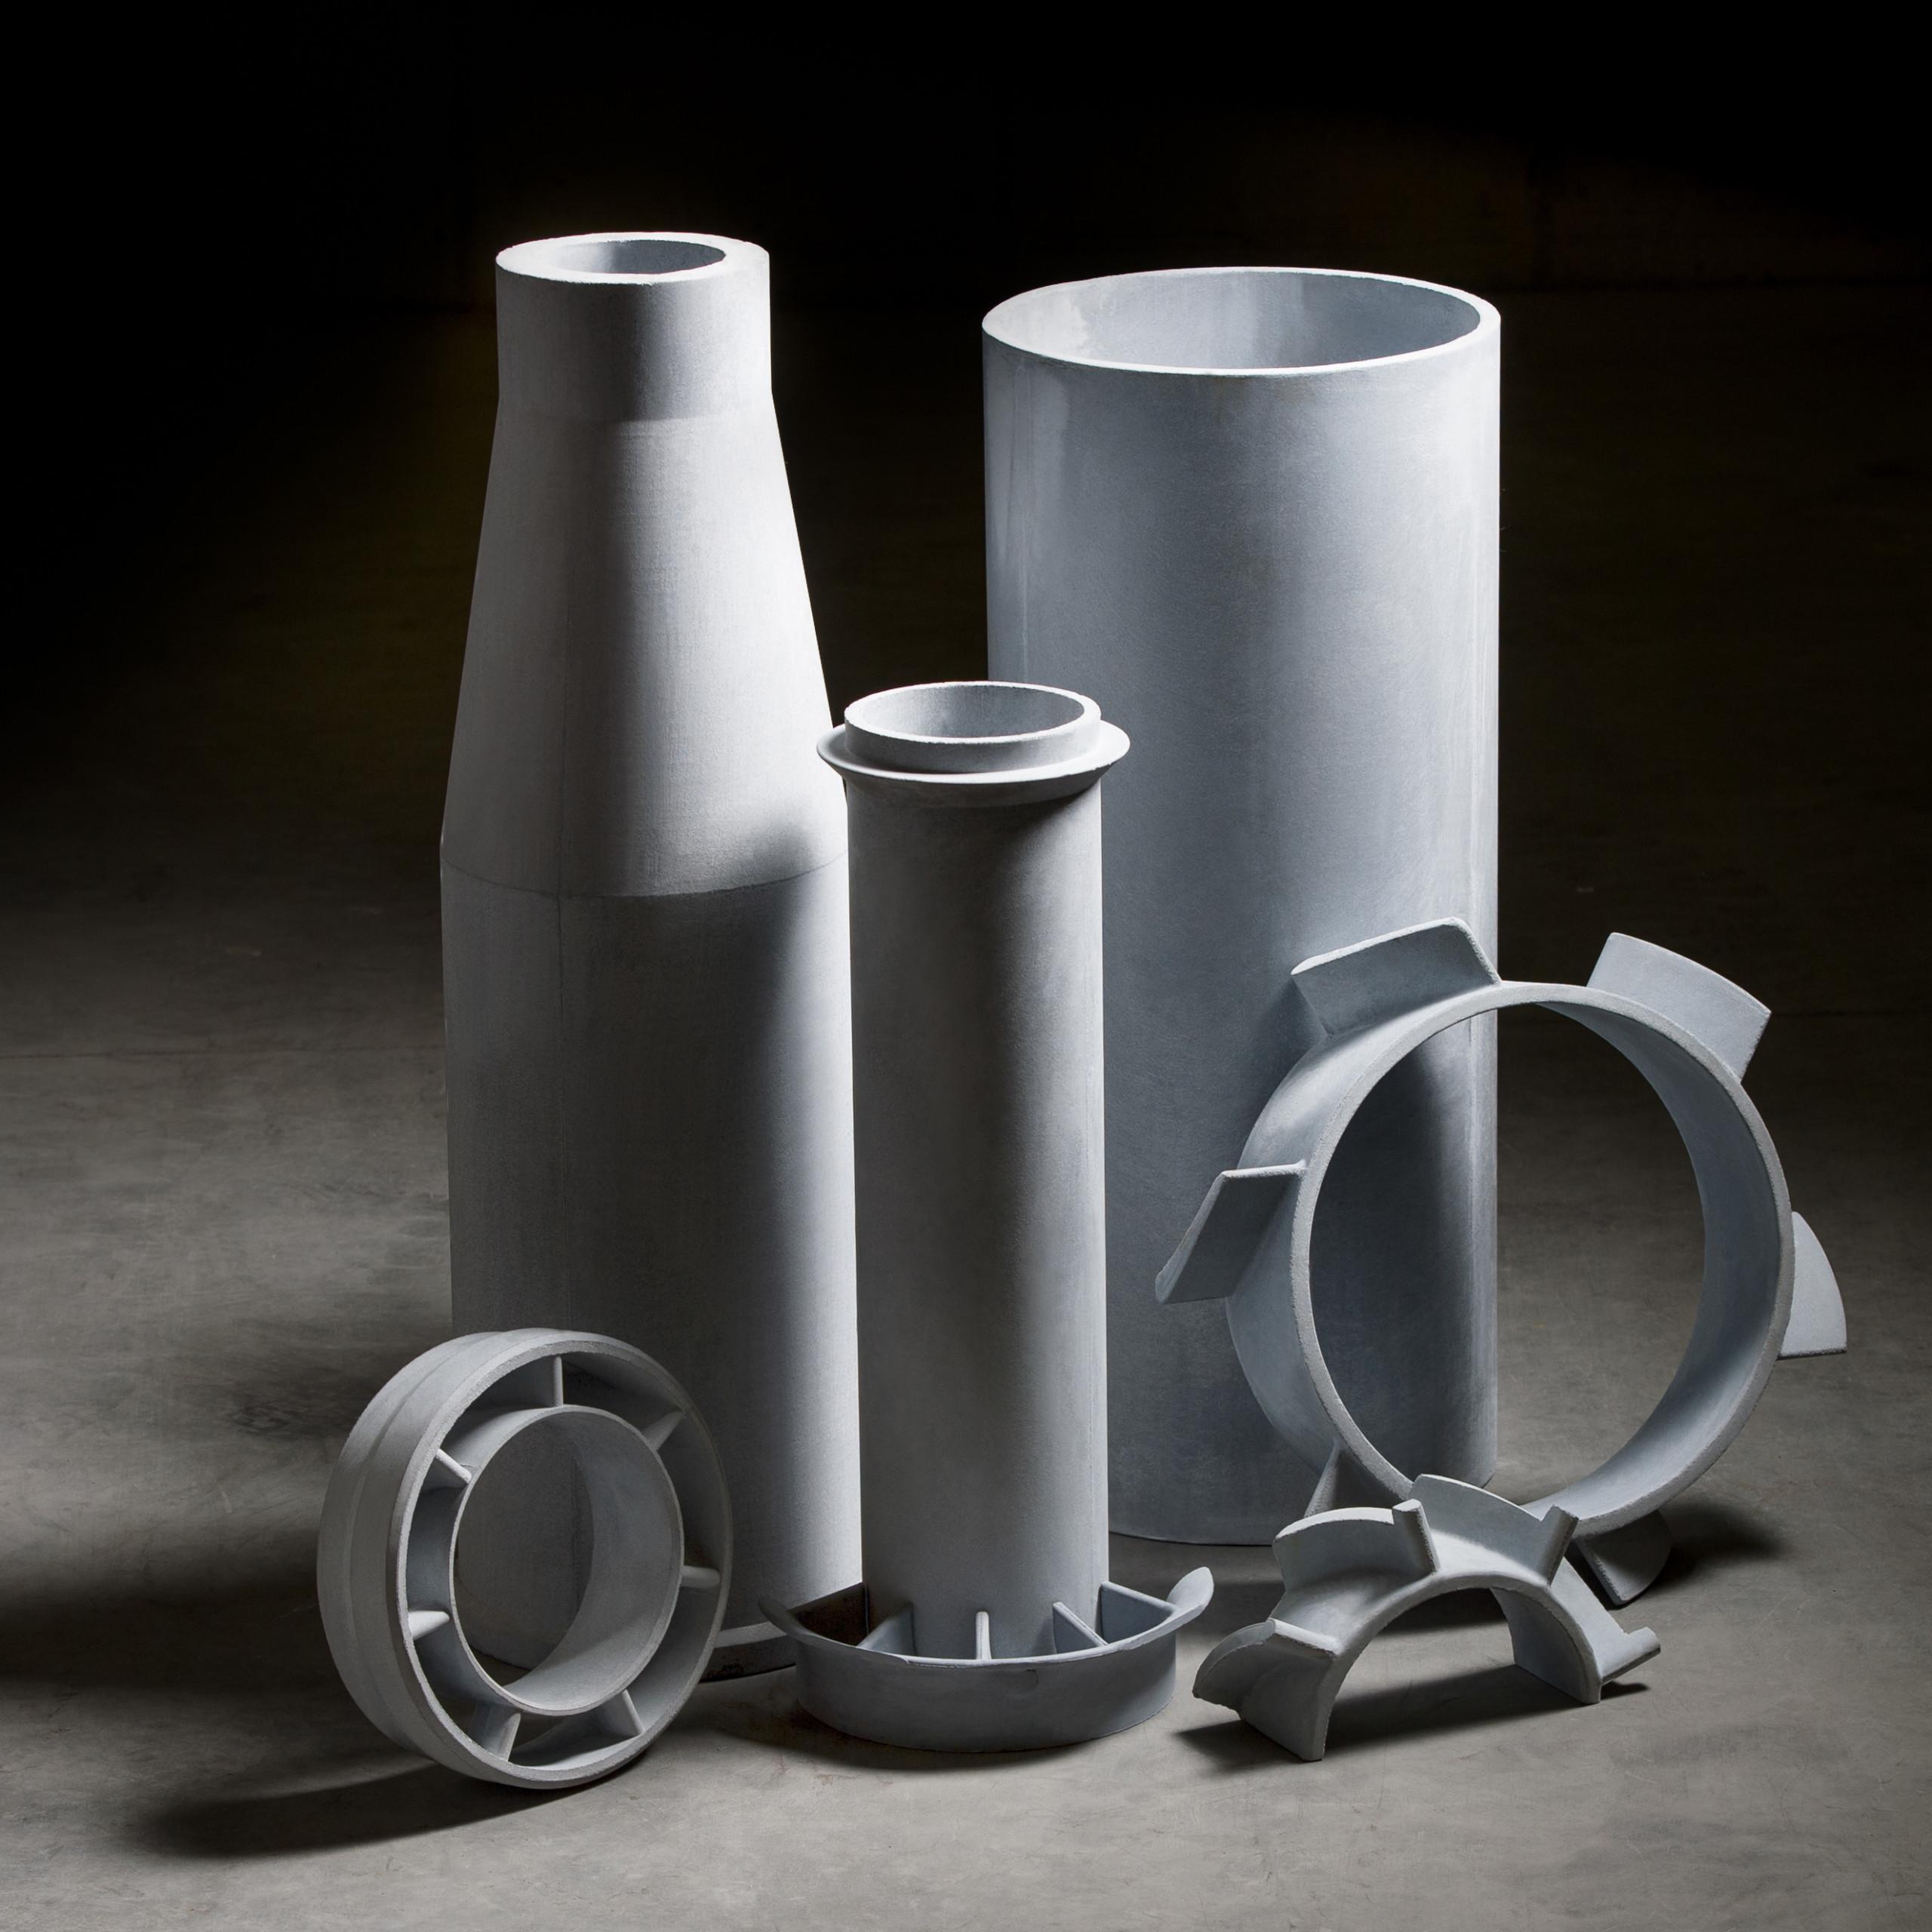 Display of cylindrical and spherical dust collector components